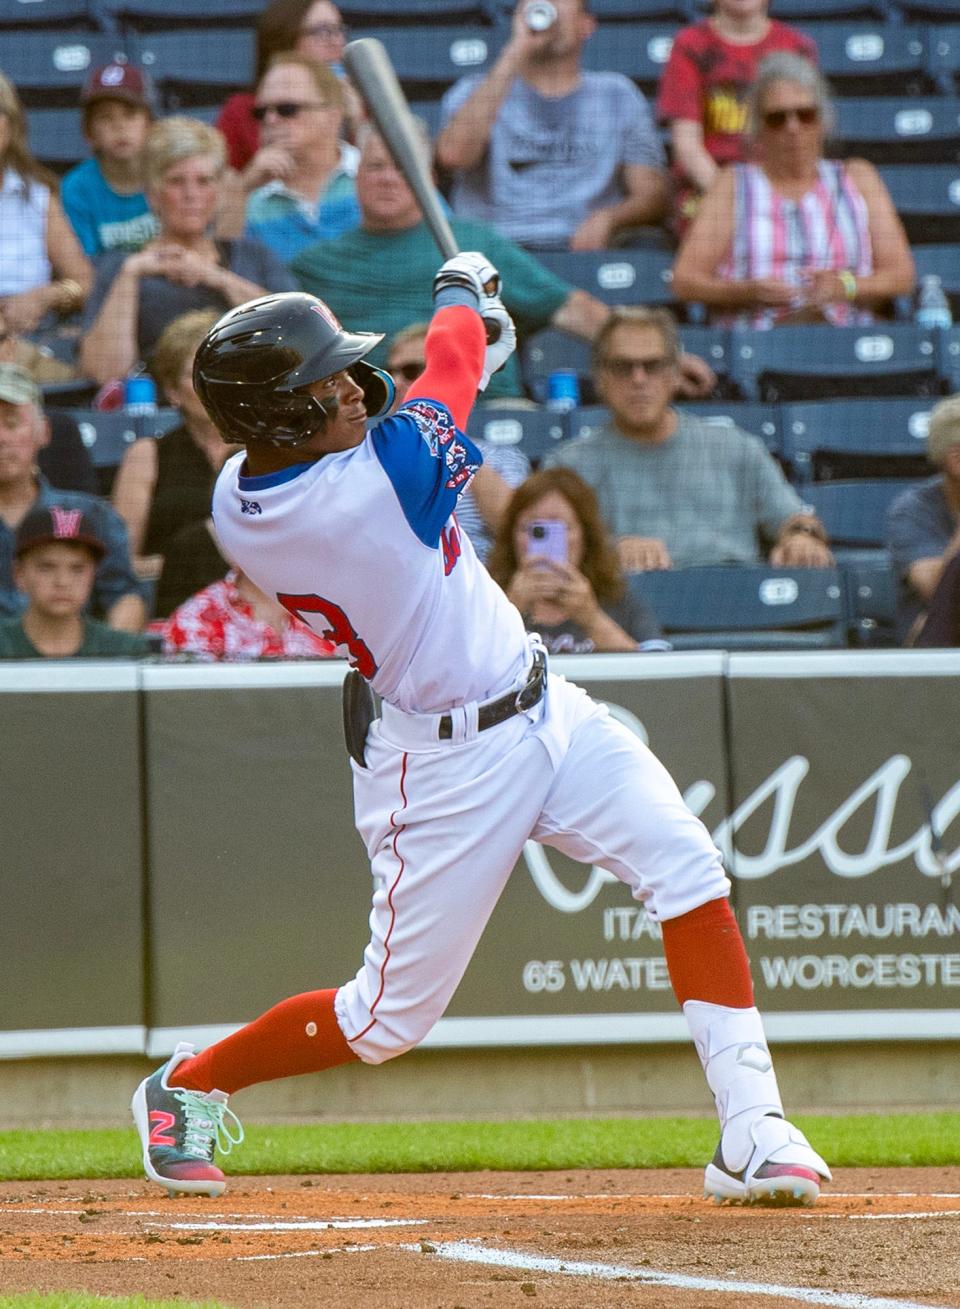 Worcester’s Ceddanne Rafaela continues to launch baseballs over the fence, as the Red Sox prospect hit his fifth homer in as many games to set a WooSox record in a win over Syracuse on Saturday.